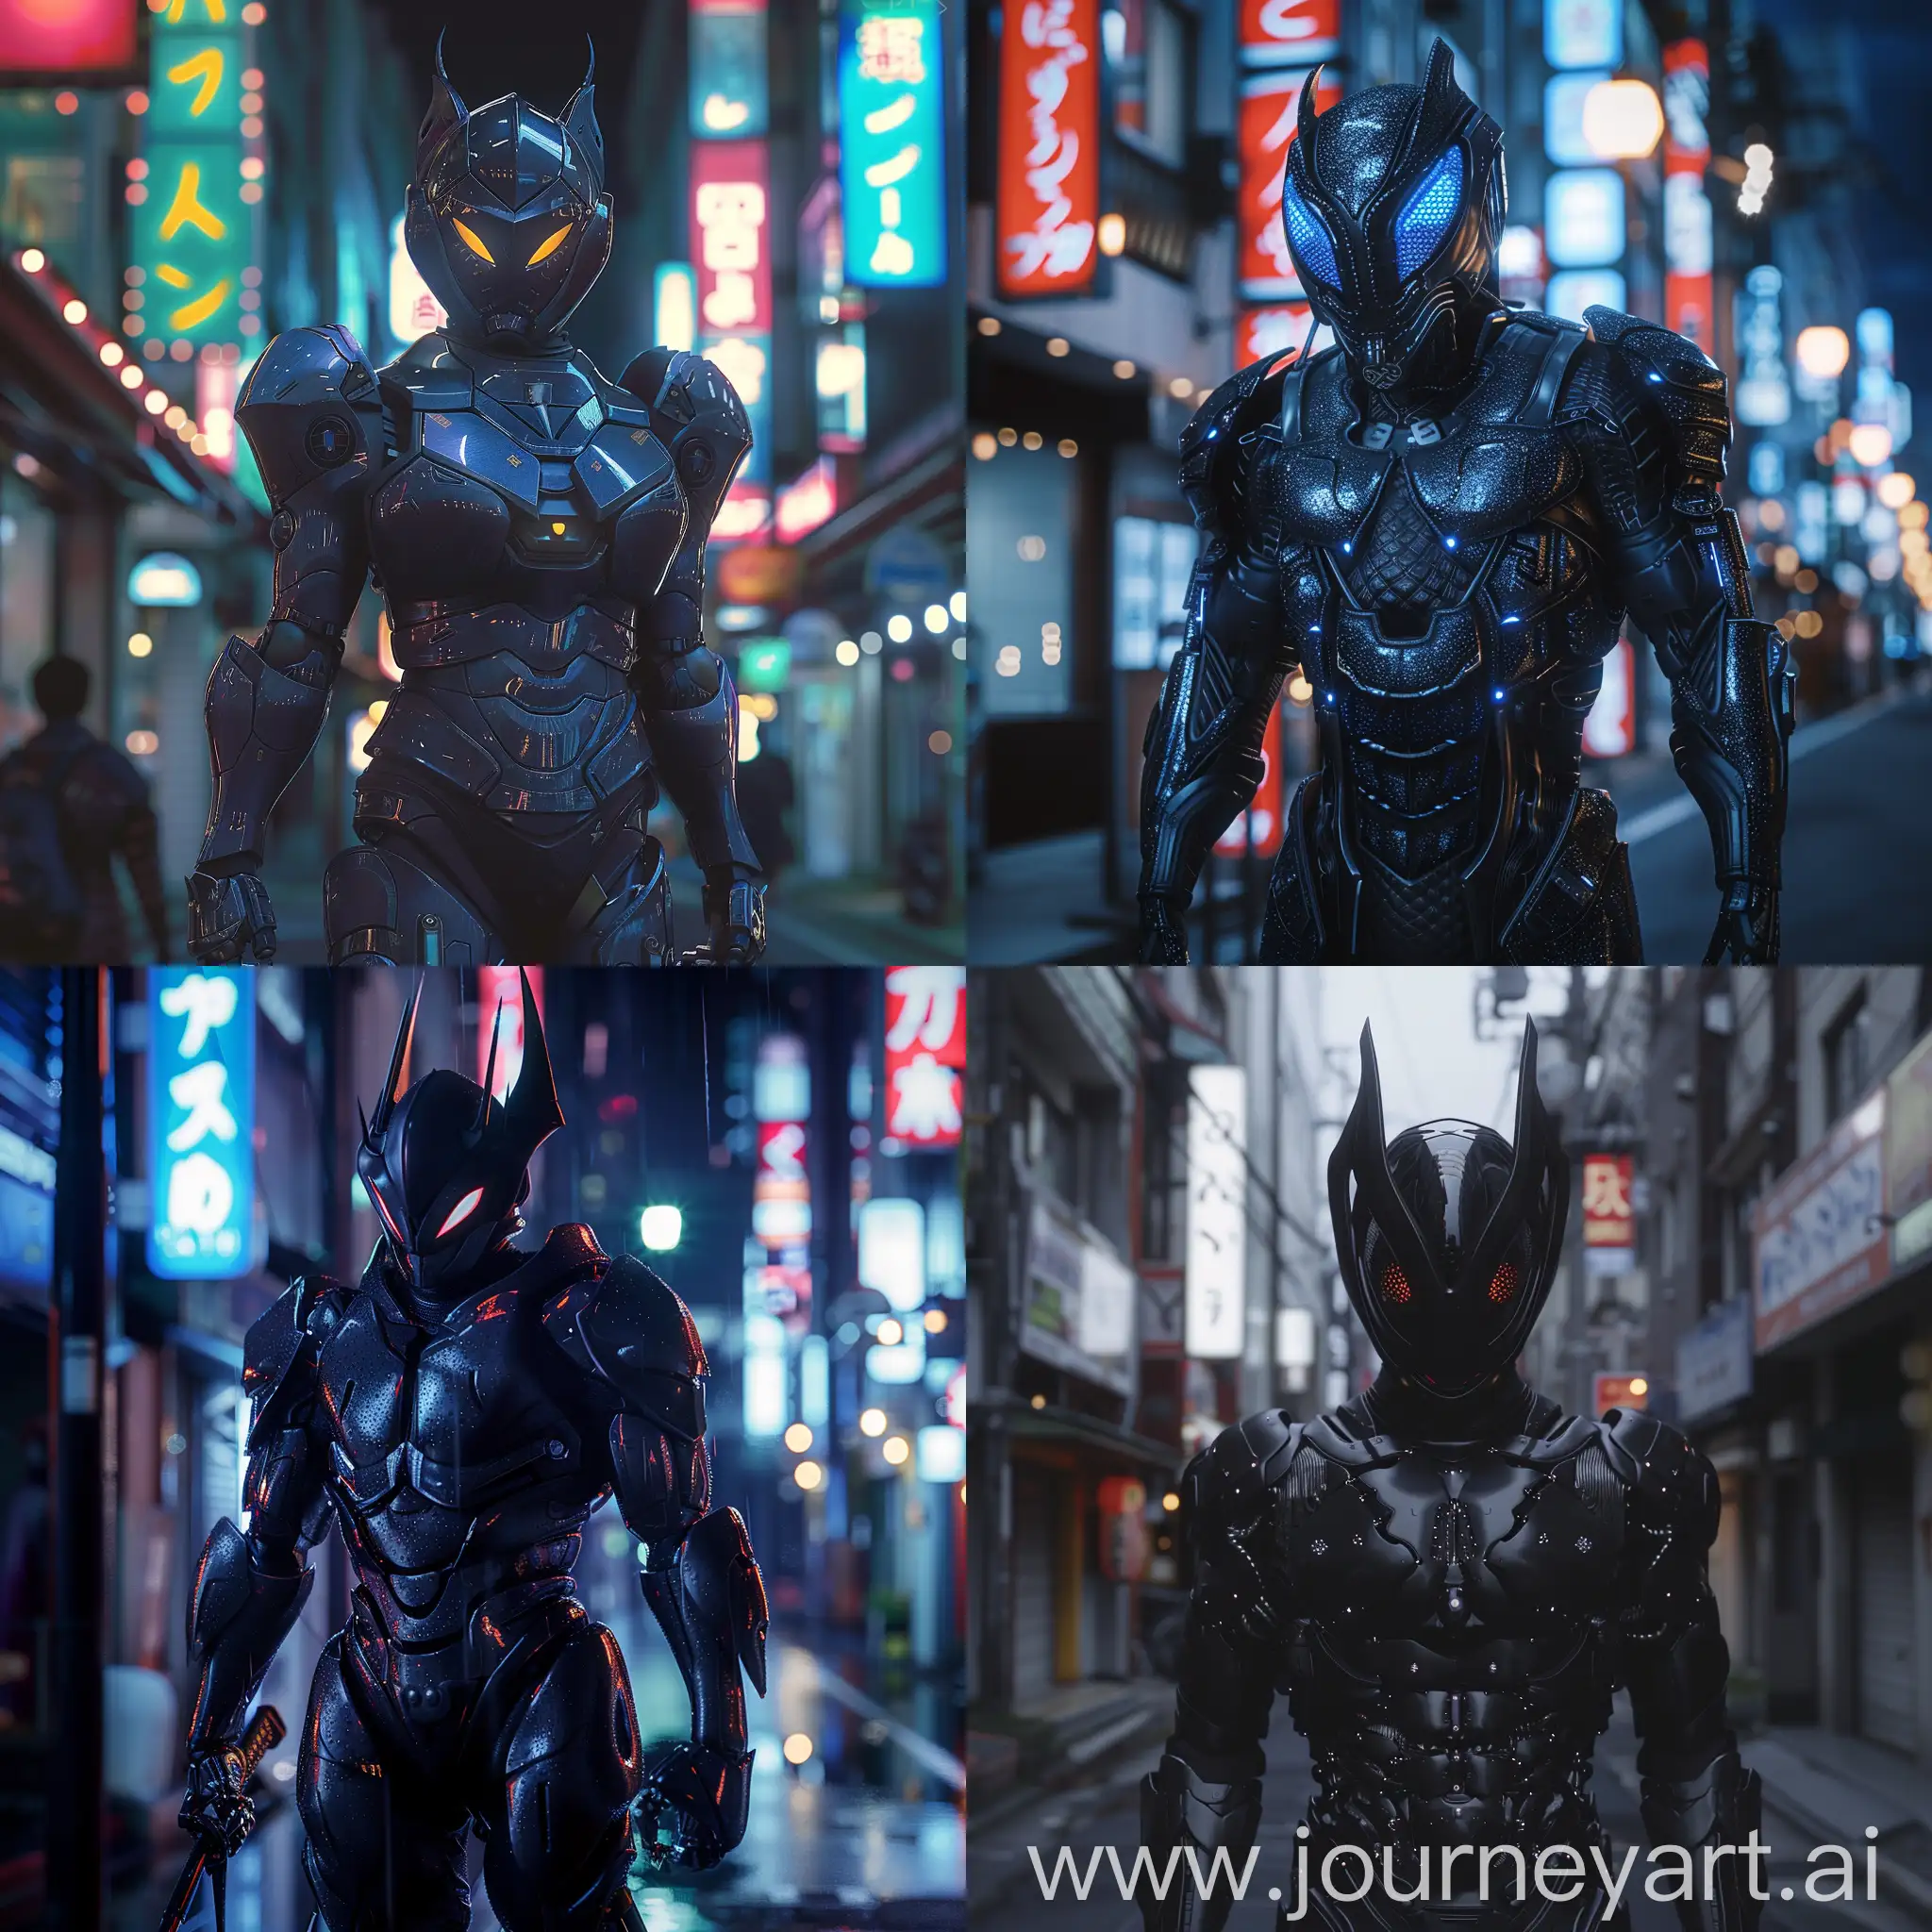 guyver the bioboosted armor, the dark guyver, the streets of japan in the '80s, ultra realistic, cinematic, 32k